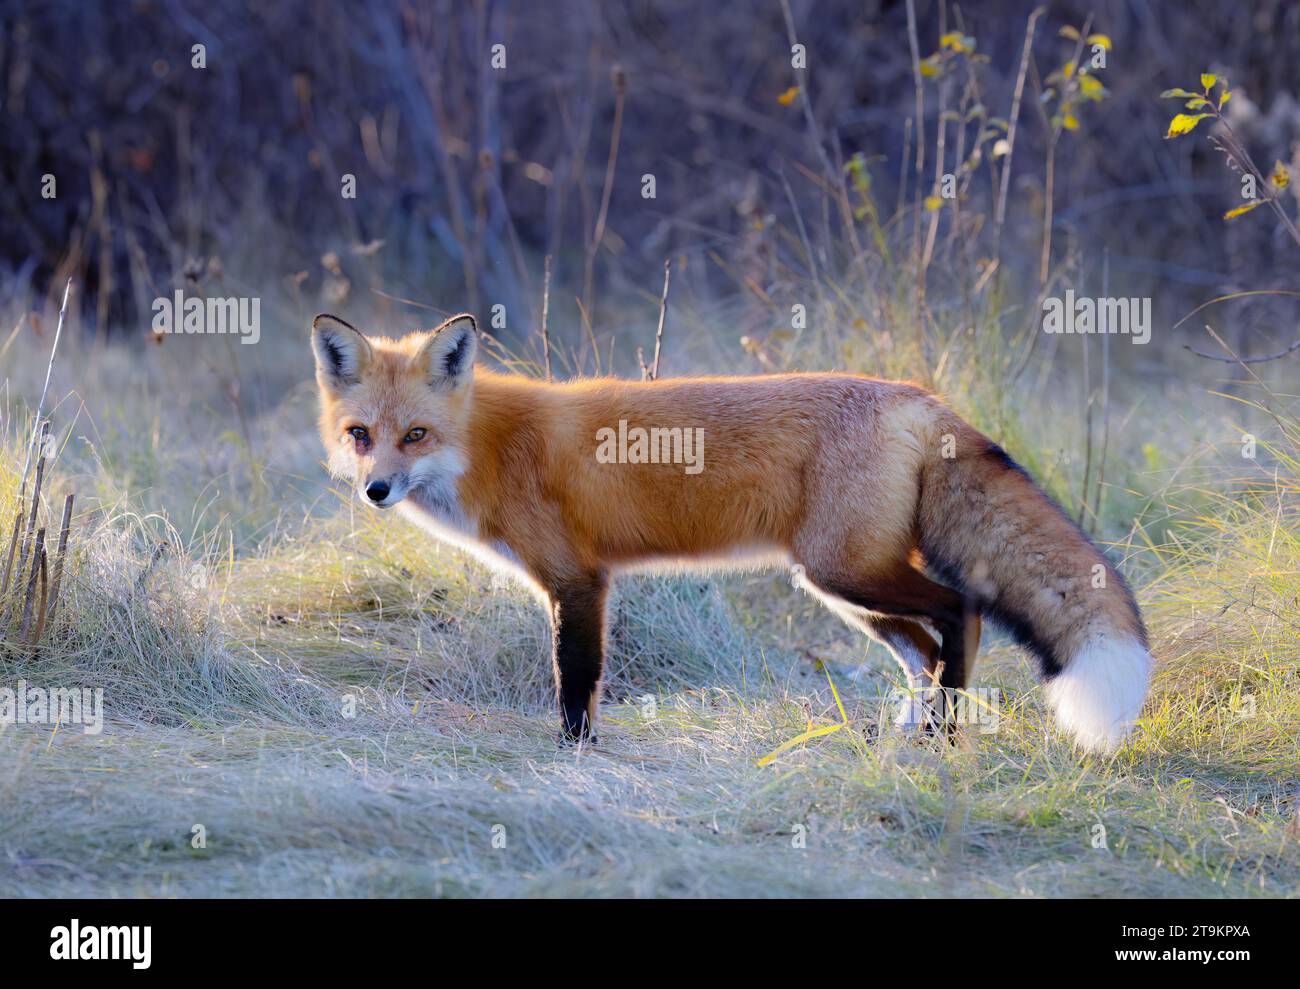 A young red fox with a beautiful tail standing in a grassy meadow in autumn. Stock Photo